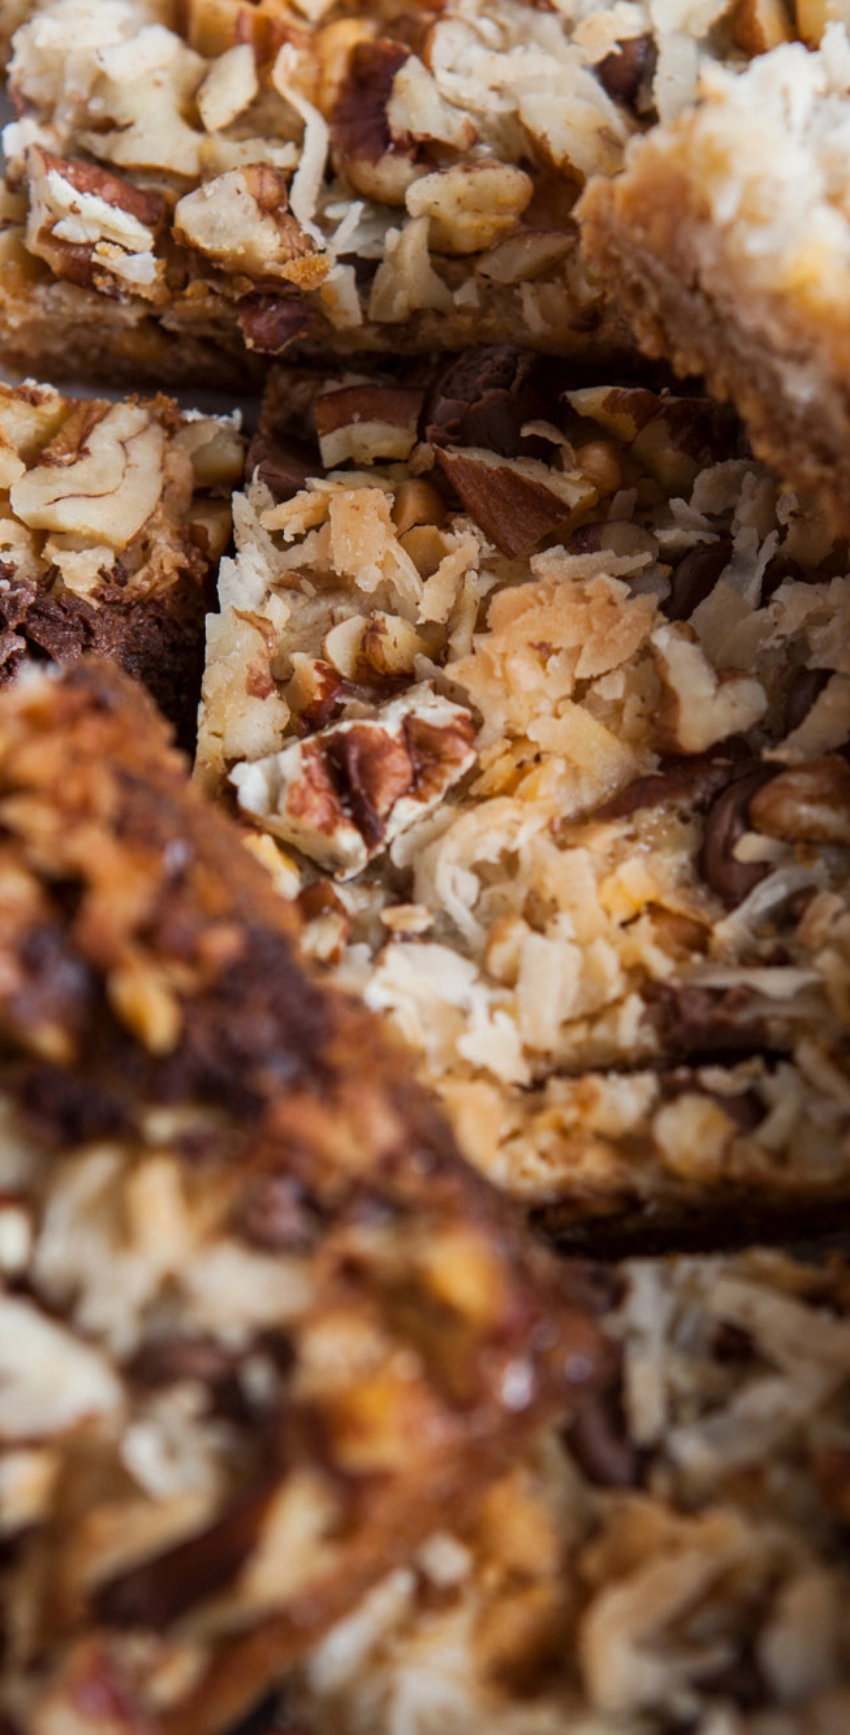 Close-up of baked dessert bars with a topping of coconut flakes, chopped nuts, and melted chocolate.